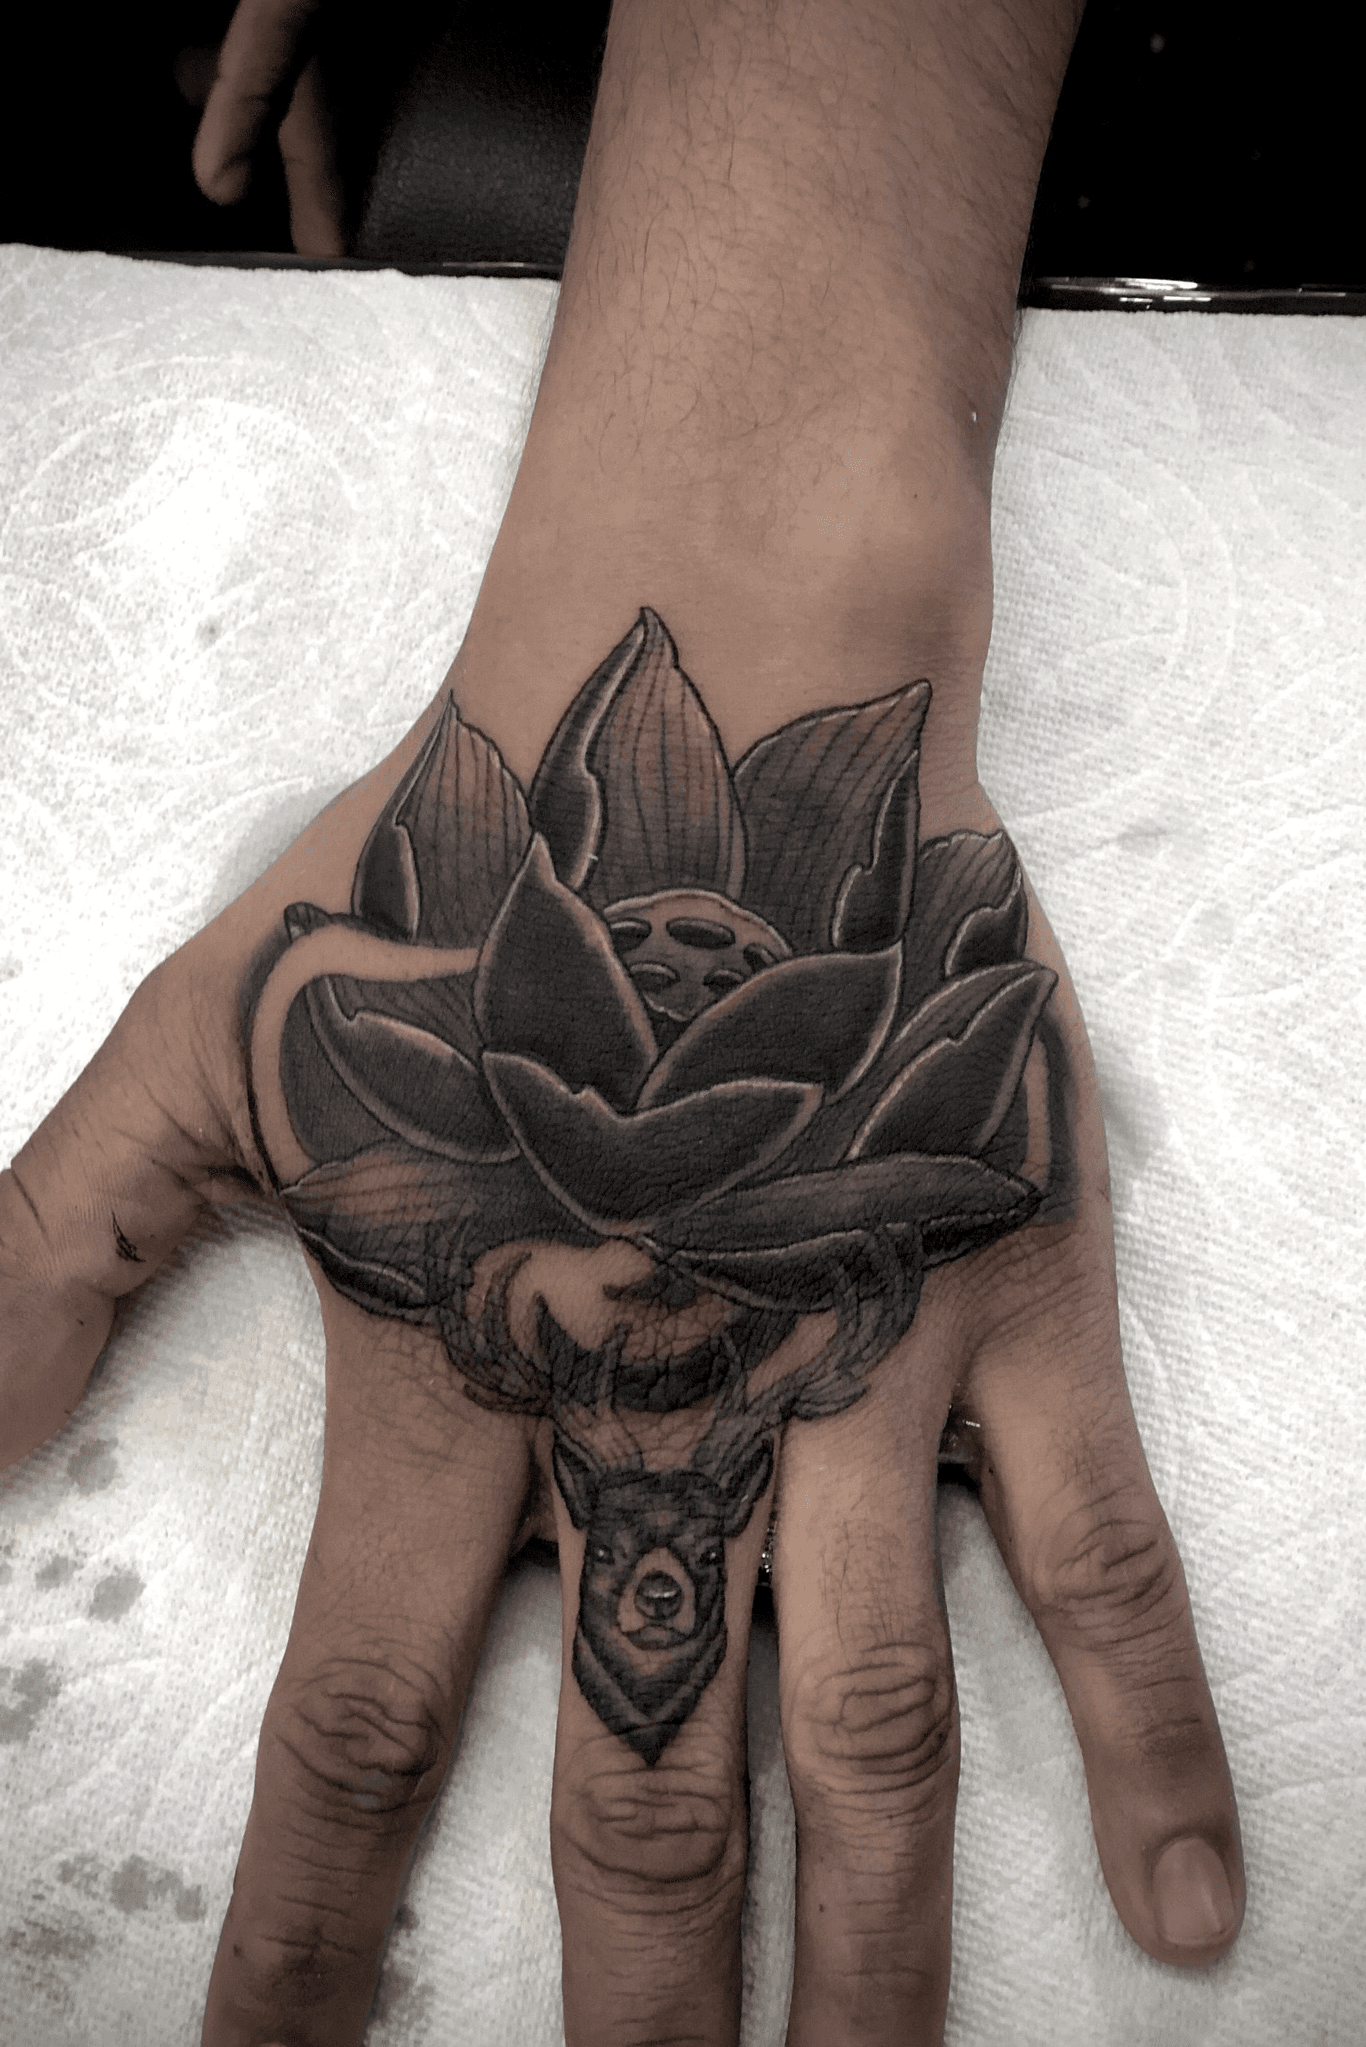 79Cute And Attractive Hand Tattoo Ideas Girls CanT Resist To Get  Psycho  Tats